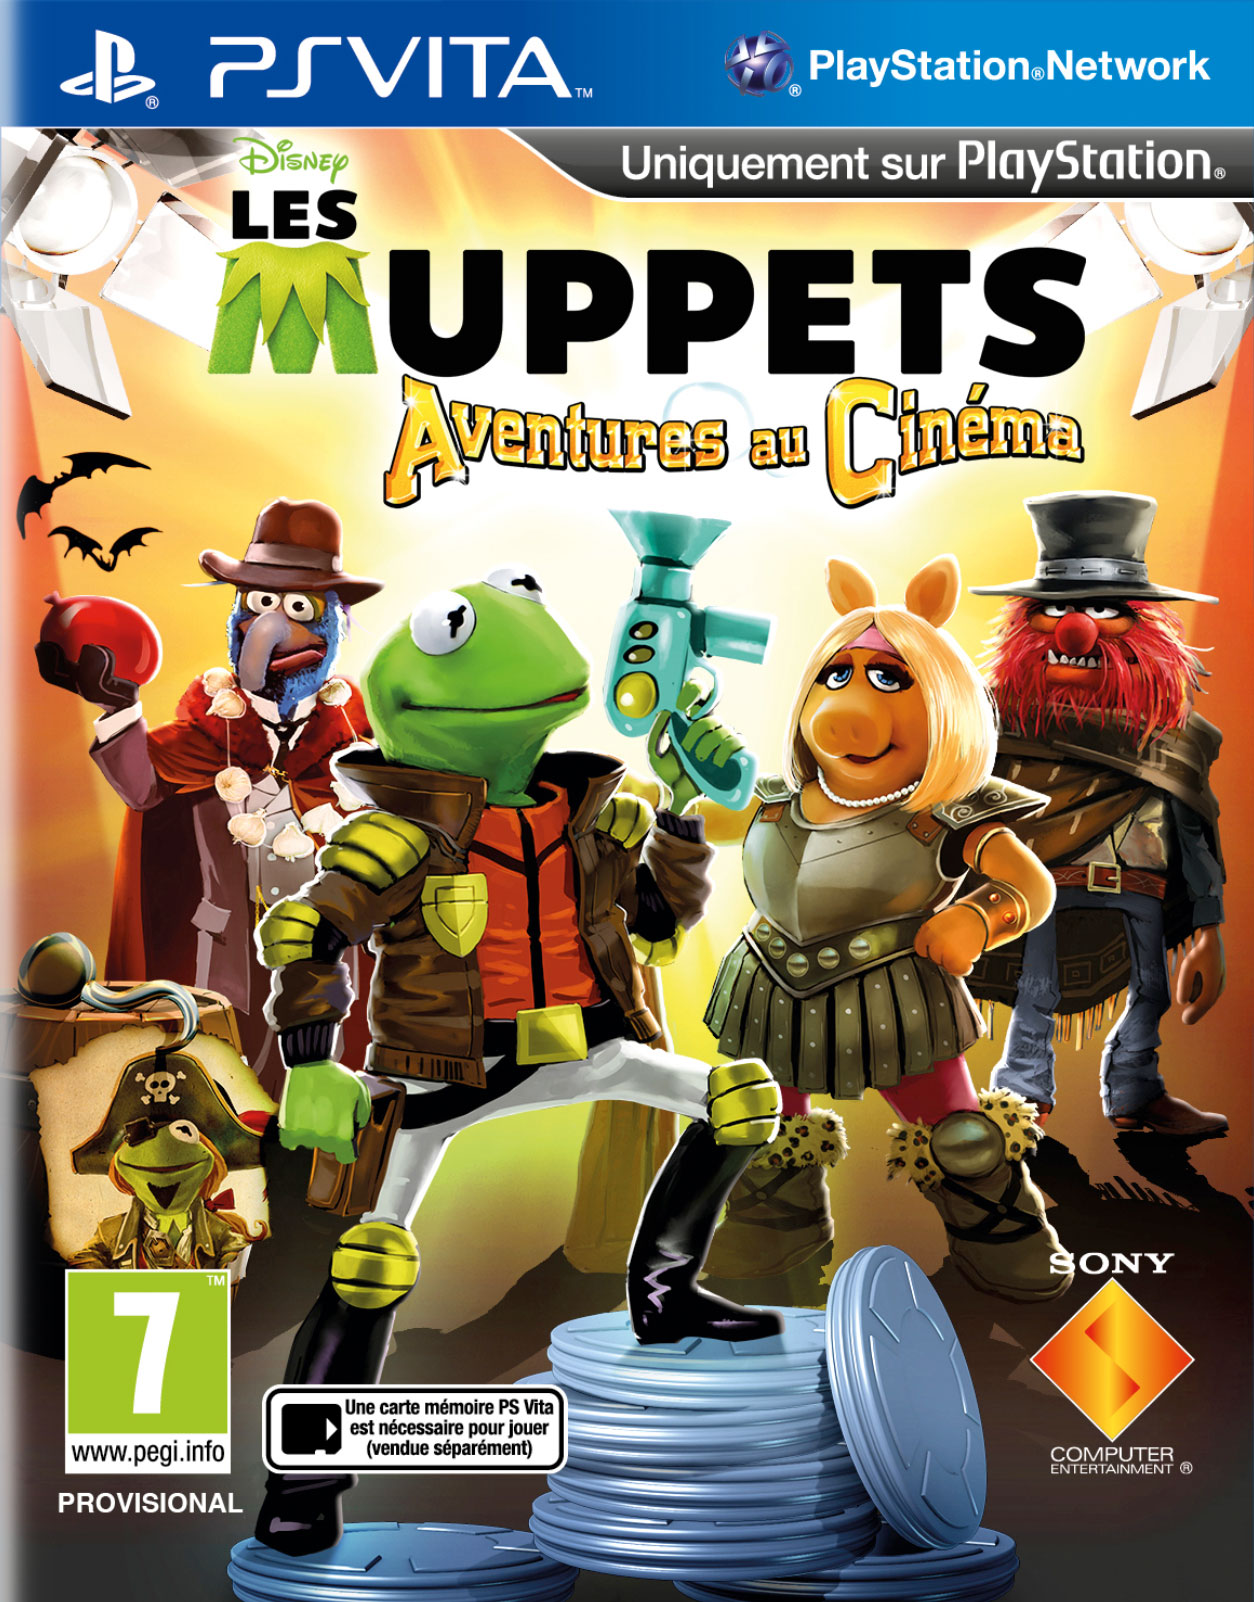 The Muppets : Movie Adventures